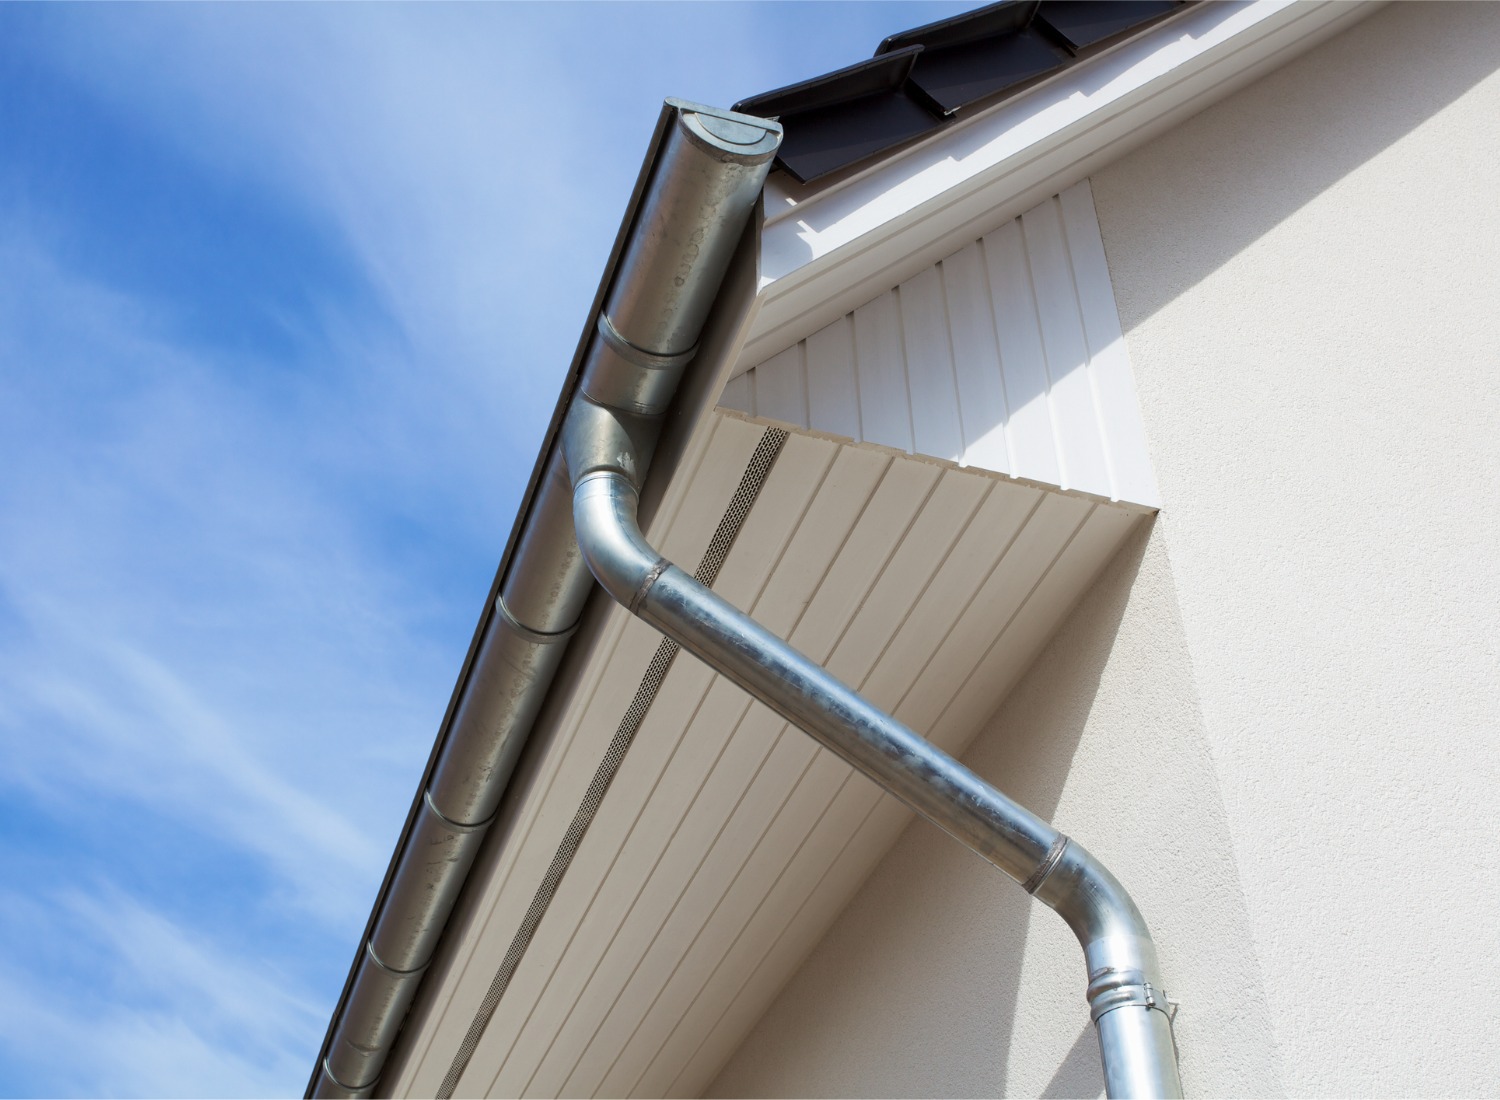 Home's rain gutter with a galvanized steel downspout